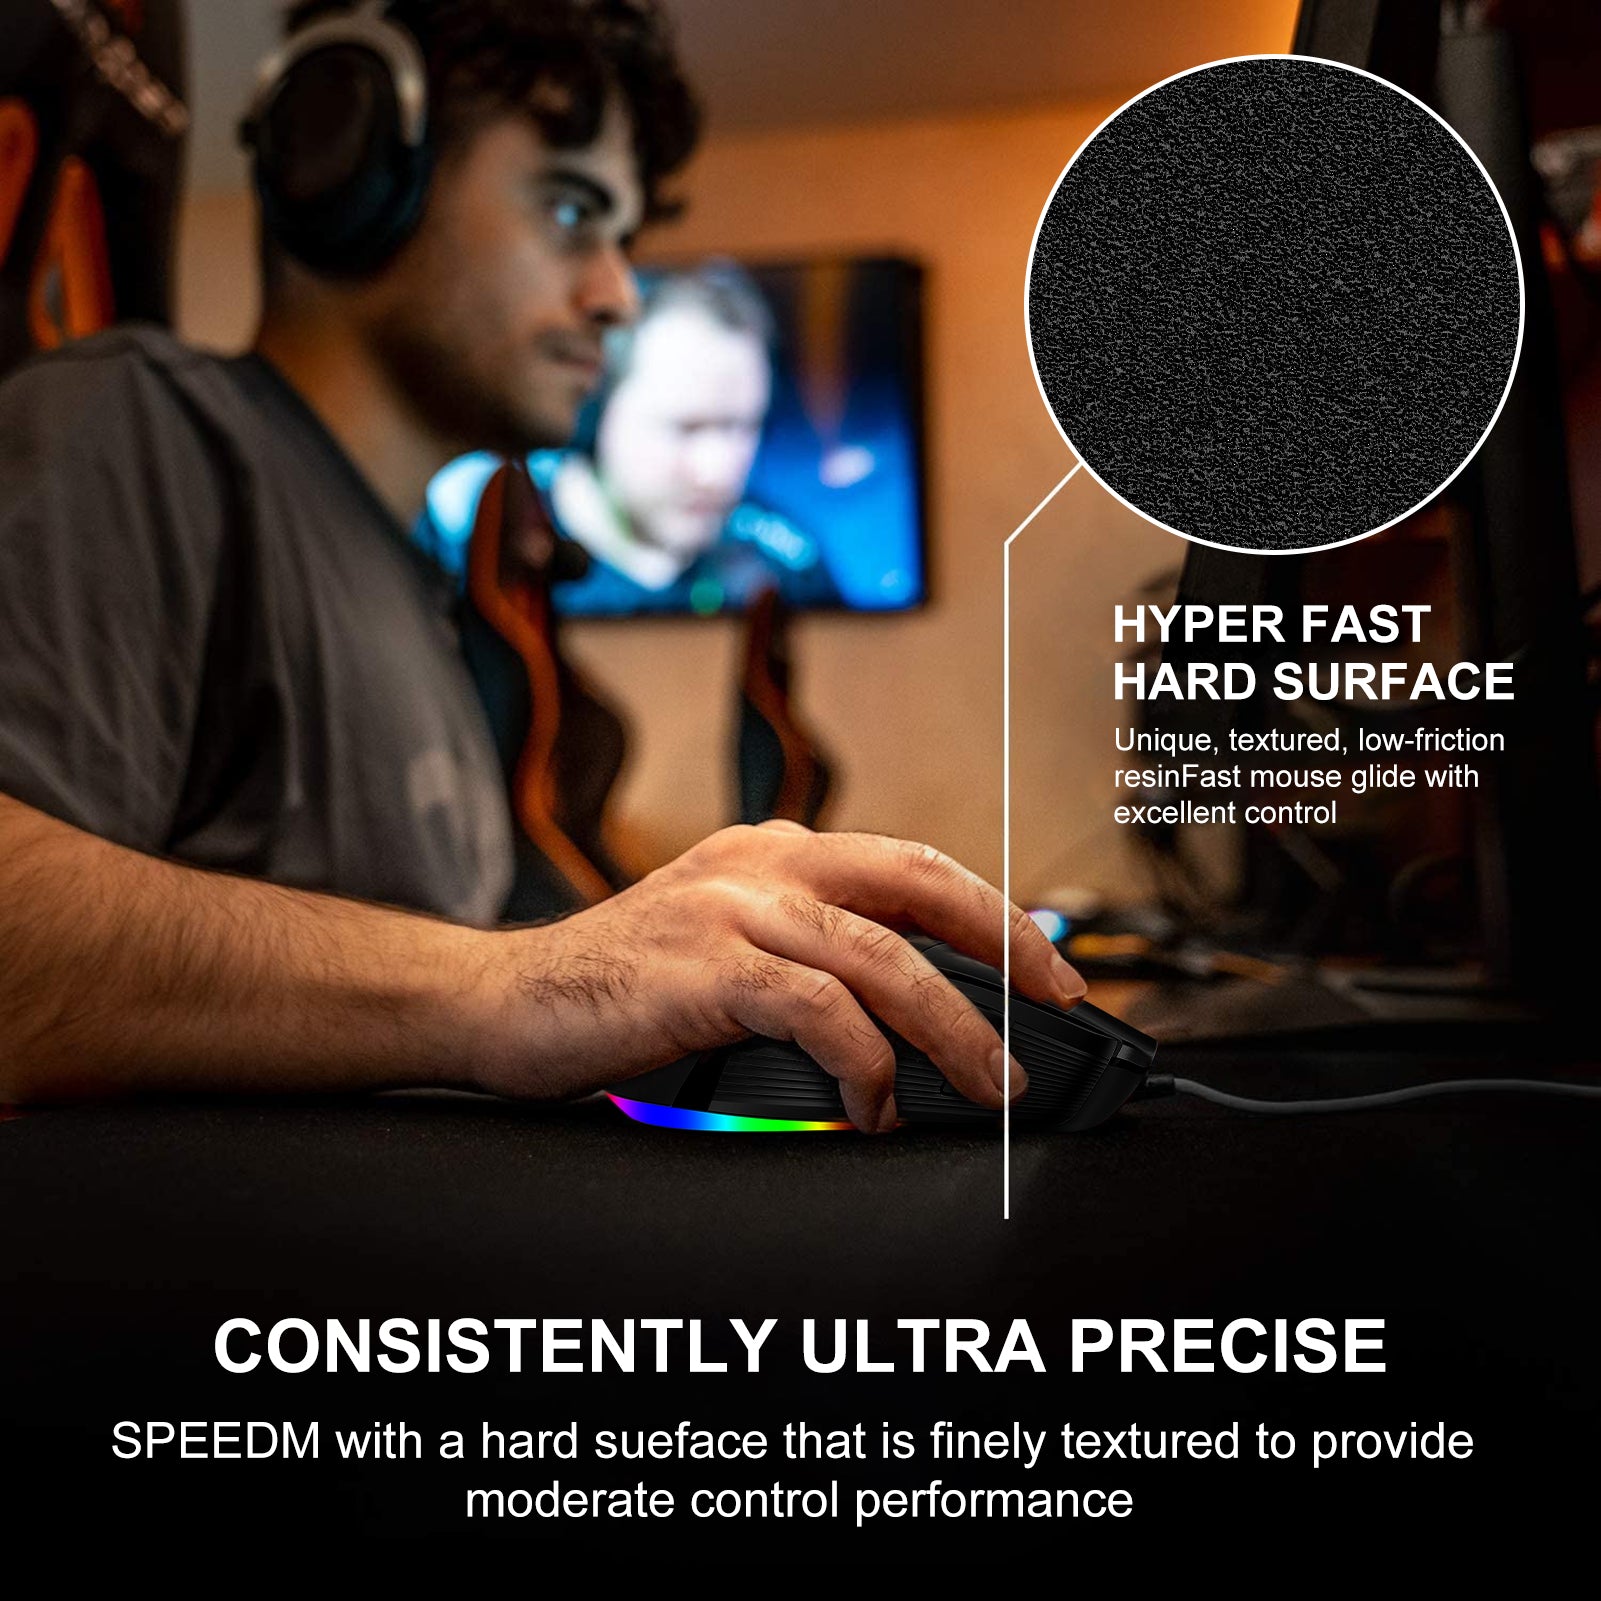 NPET SPEEDM Gaming Mousepad - Resin Surface Hard Gaming Mouse pad,Balanced Control & Speed, No Smell Waterproof Mouse Mat for Esports Gamers [Hard/Fast] Black L Size